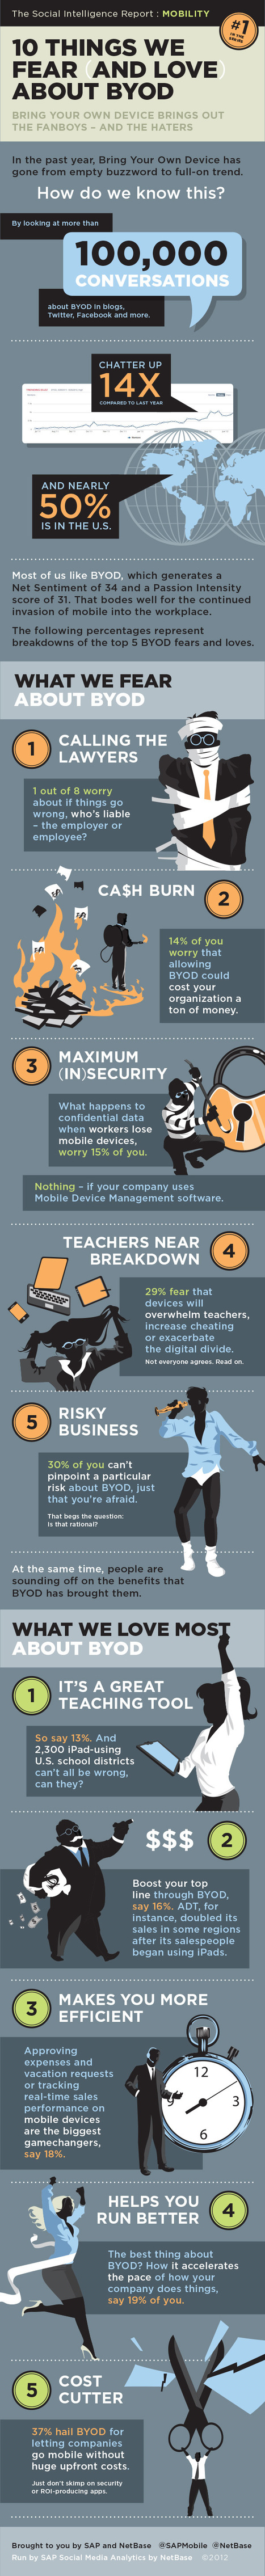 Infographic: The Ten Things We Fear (And Love) About BYOD | 21st Century Learning and Teaching | Scoop.it